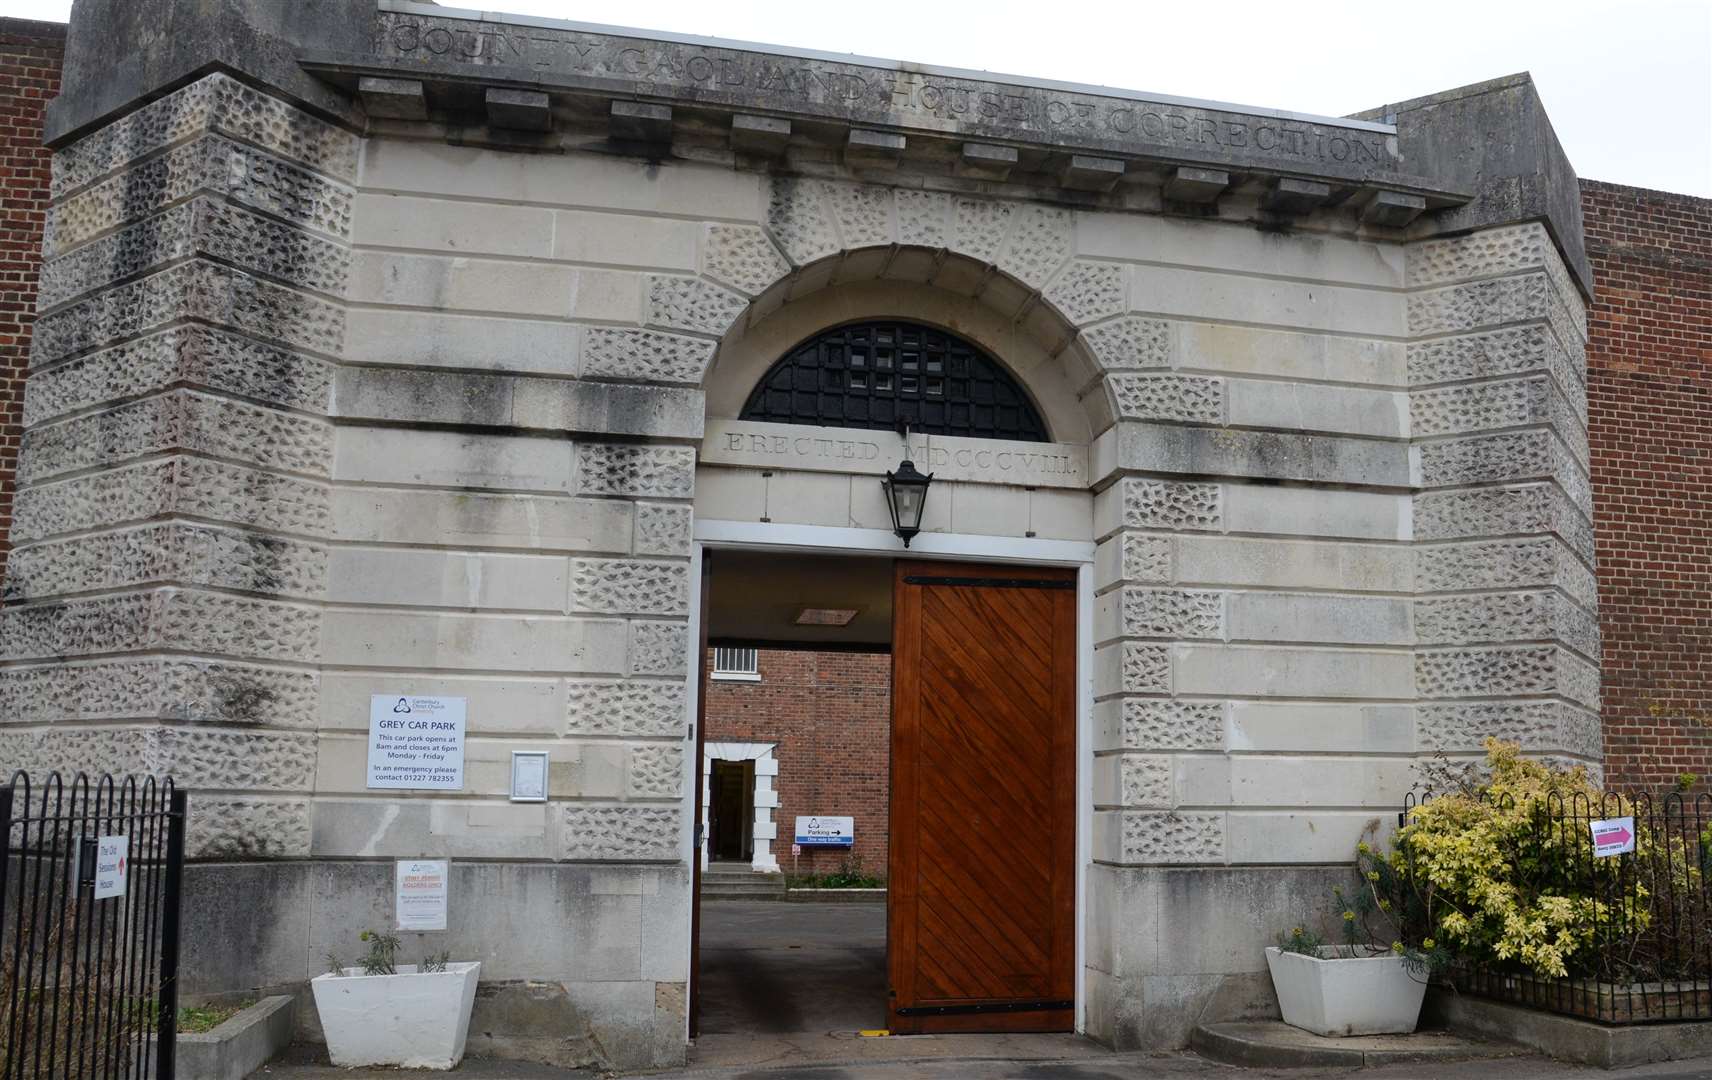 The former Canterbury Prison